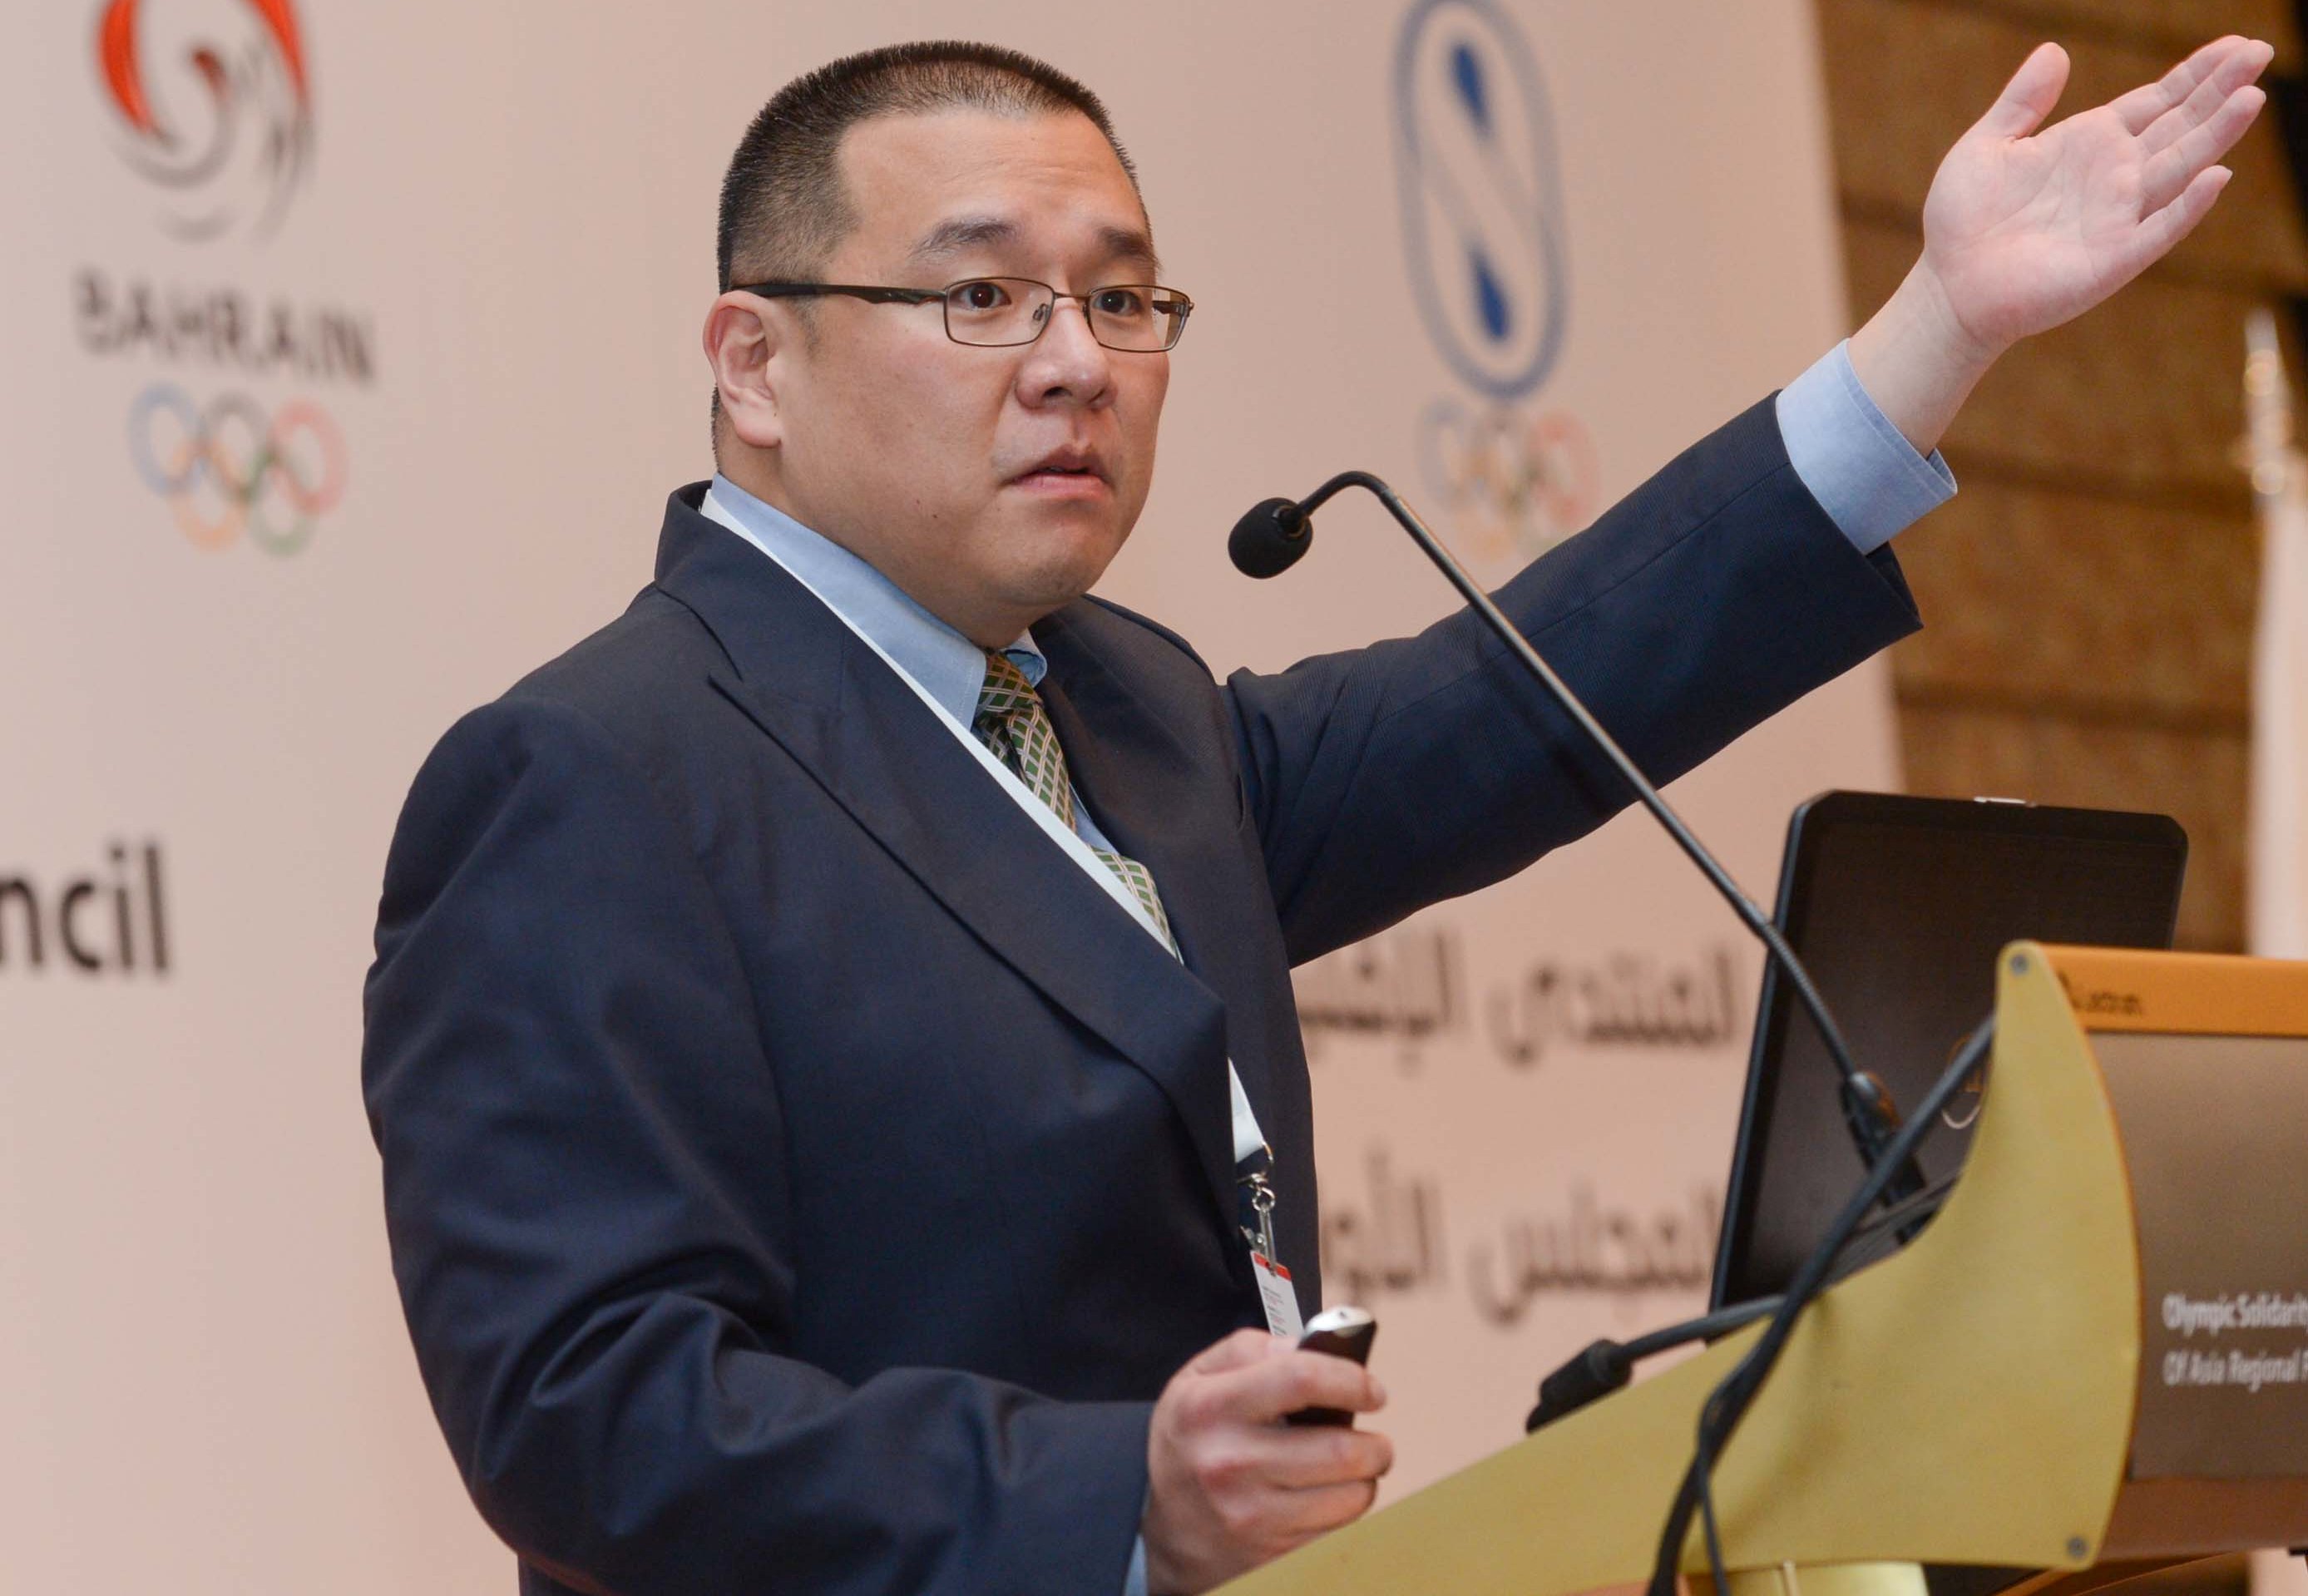 Sungsik Cho providing an update about the Incheon 2014 Asian Games during the OCA Regional Forum ©BOC